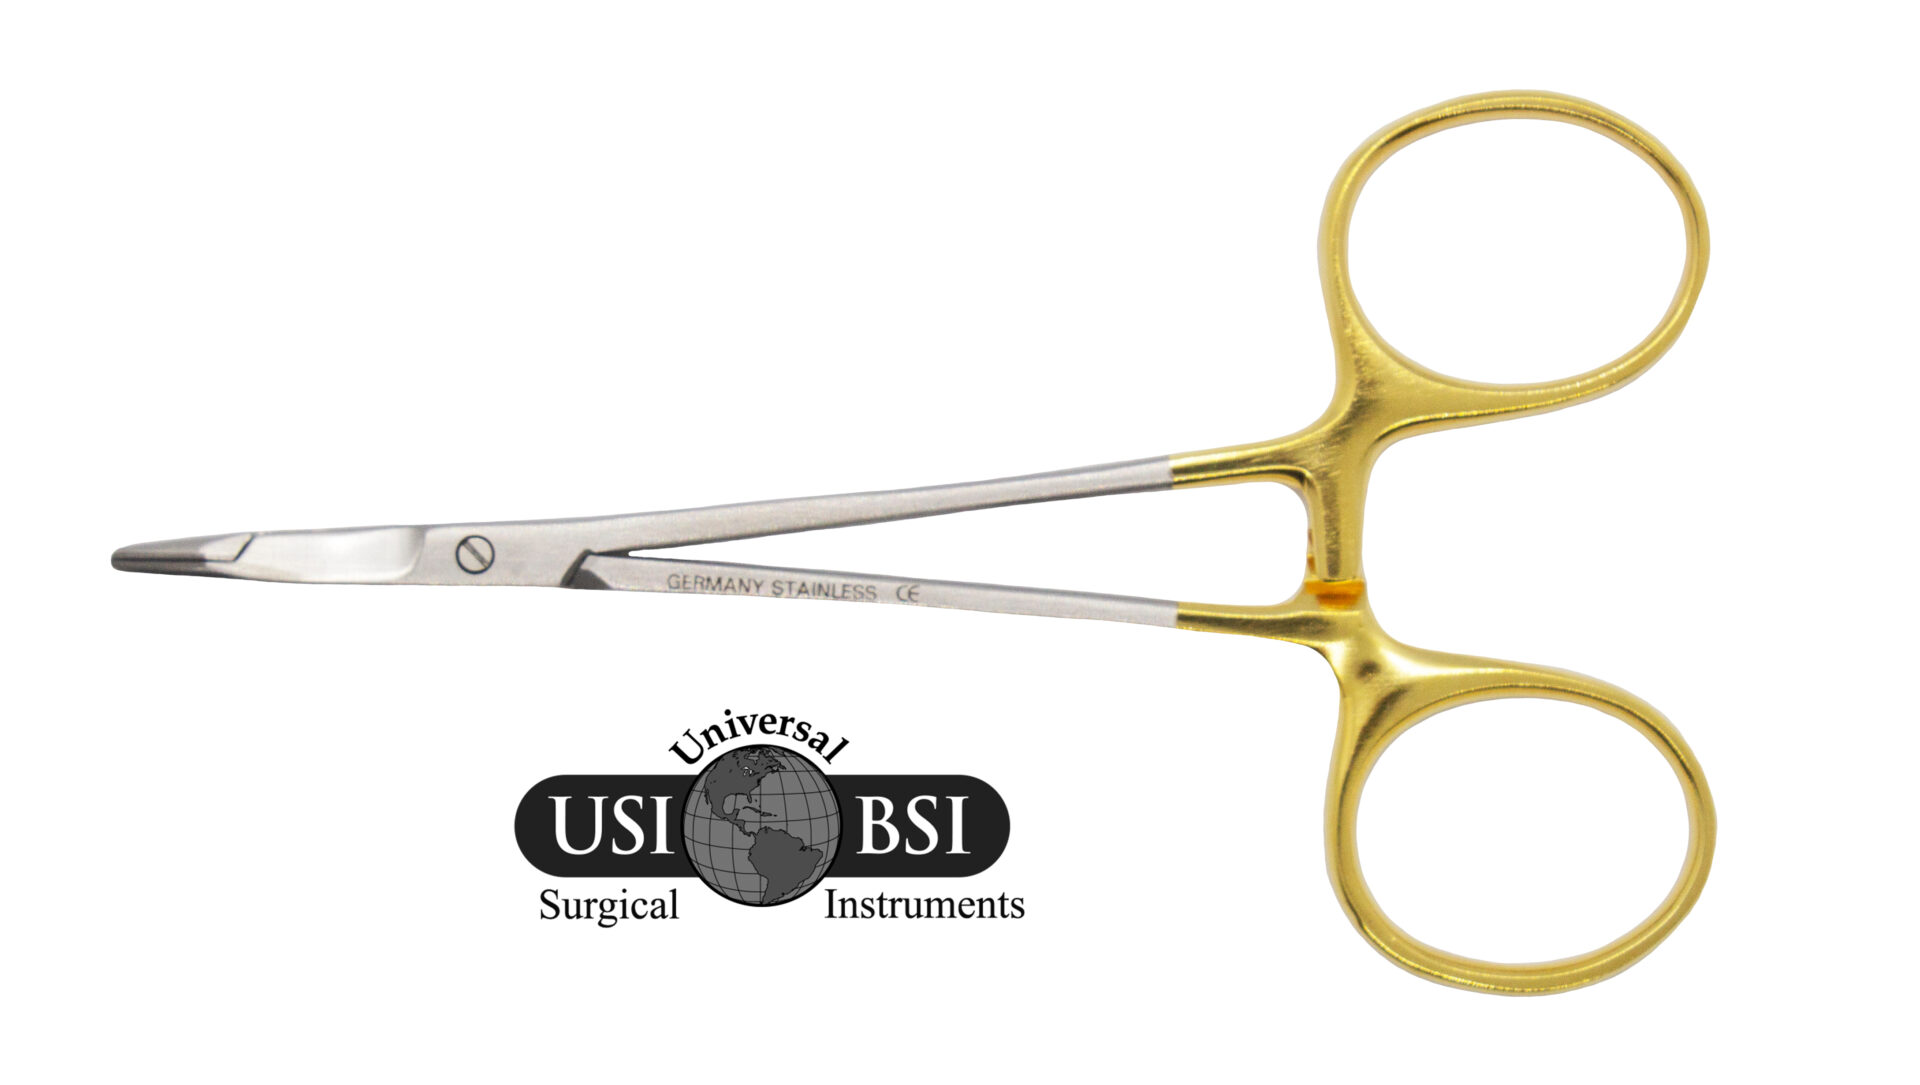 A pair of scissors with gold handles and a logo.